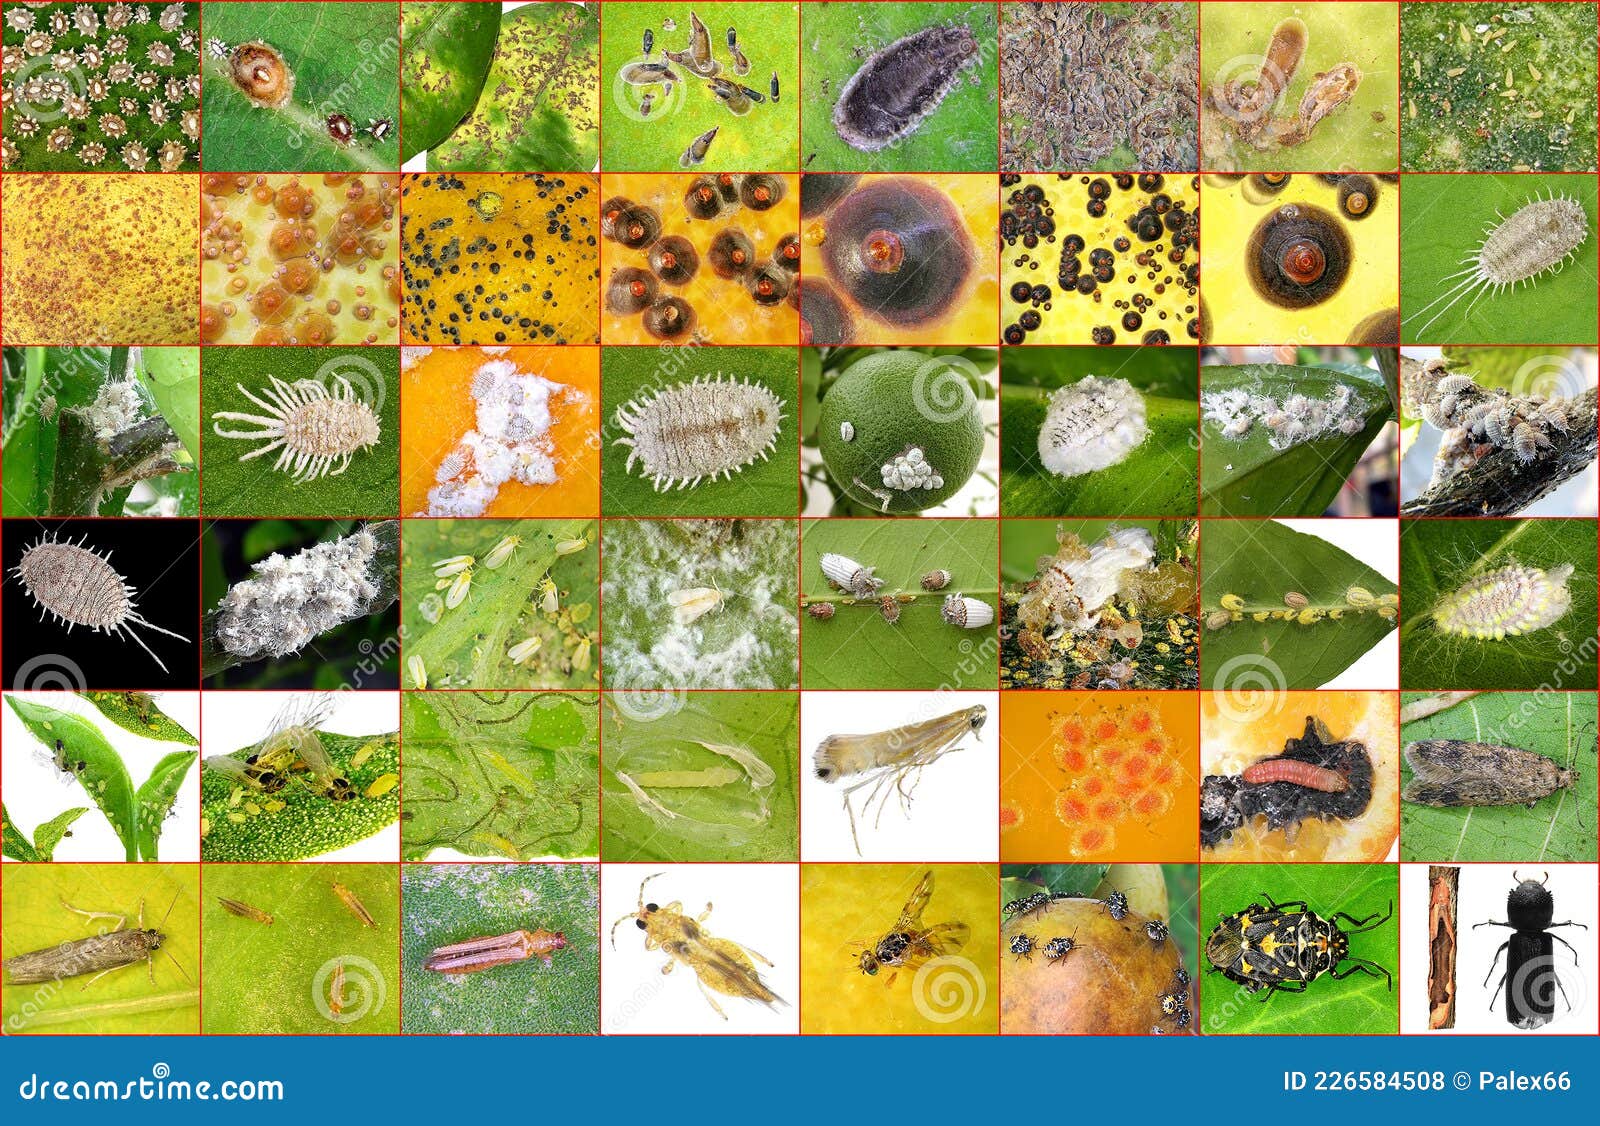 main citrus insect pests